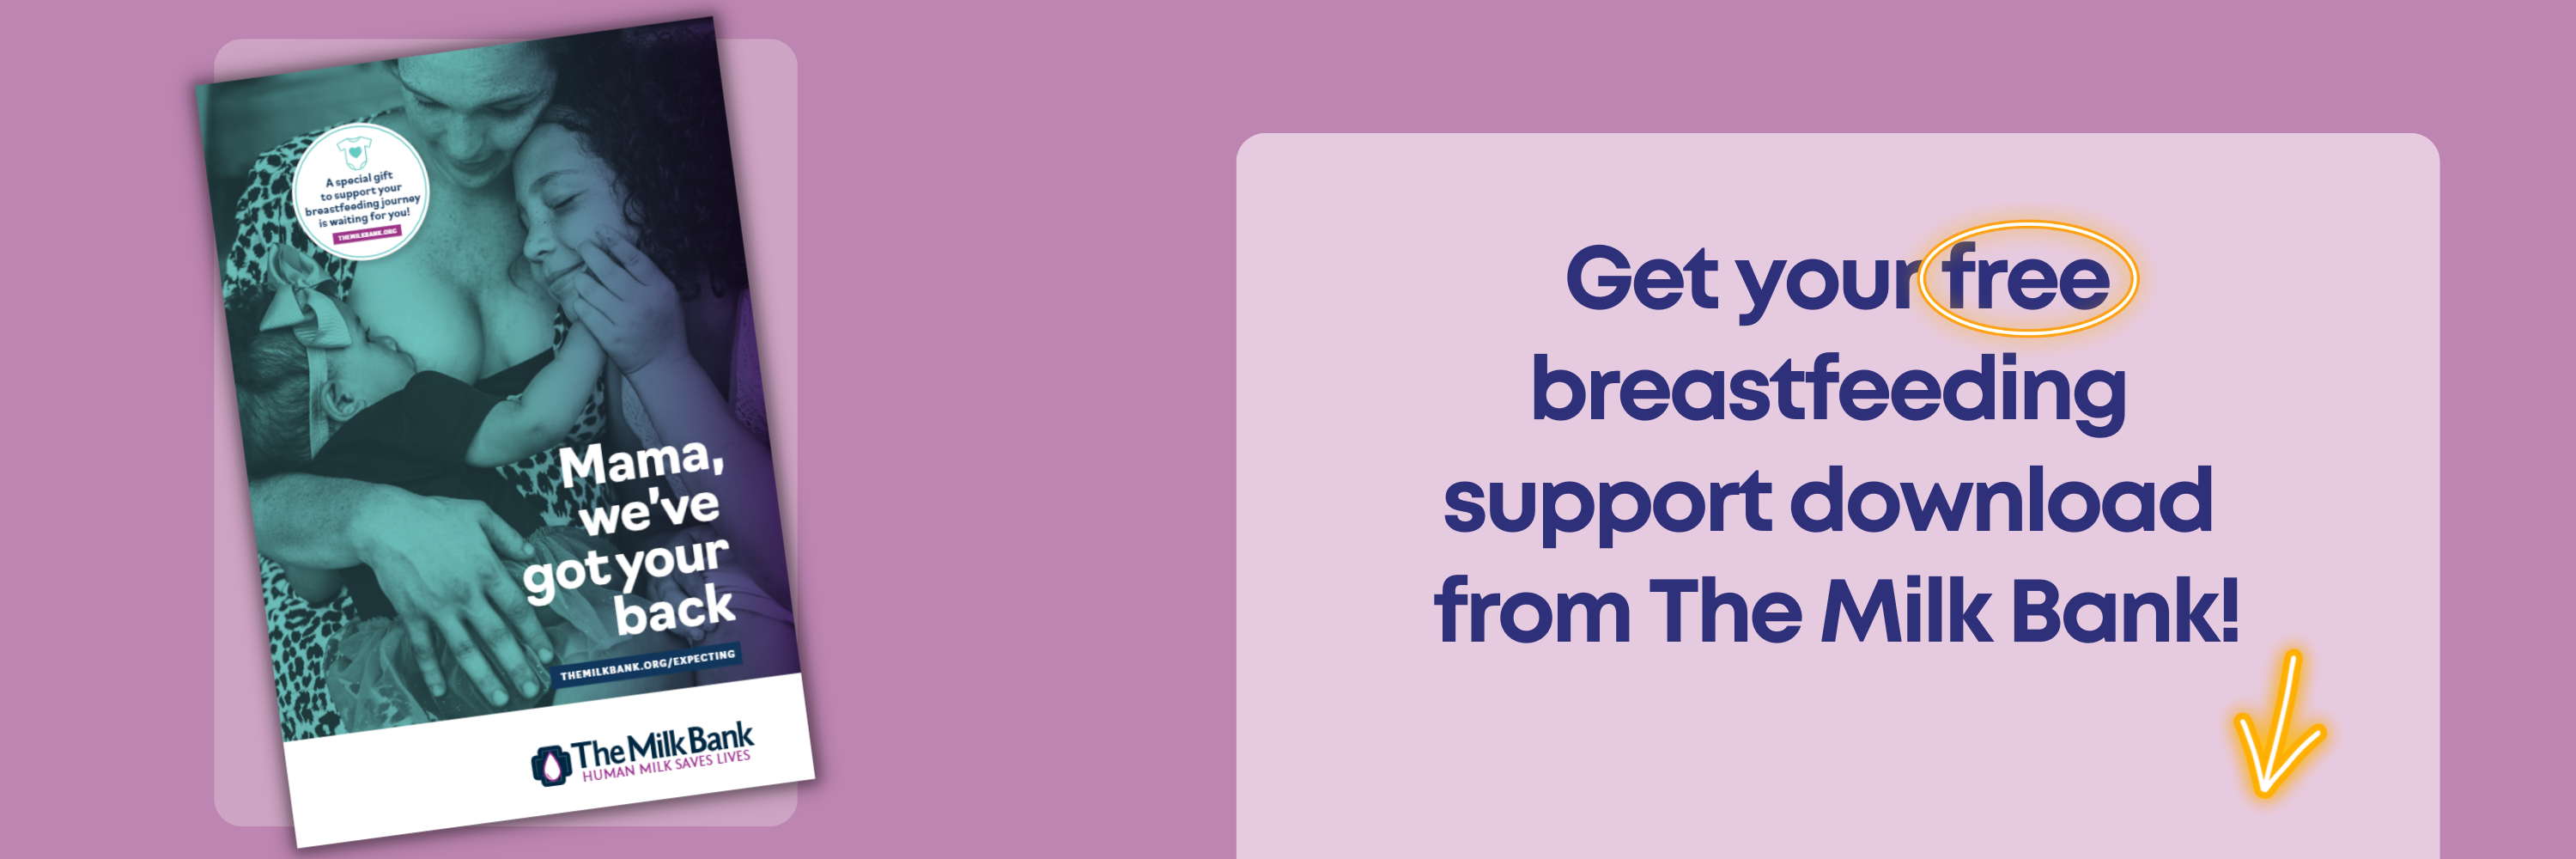 Get your free breastfeeding support download from The Milk Bank!